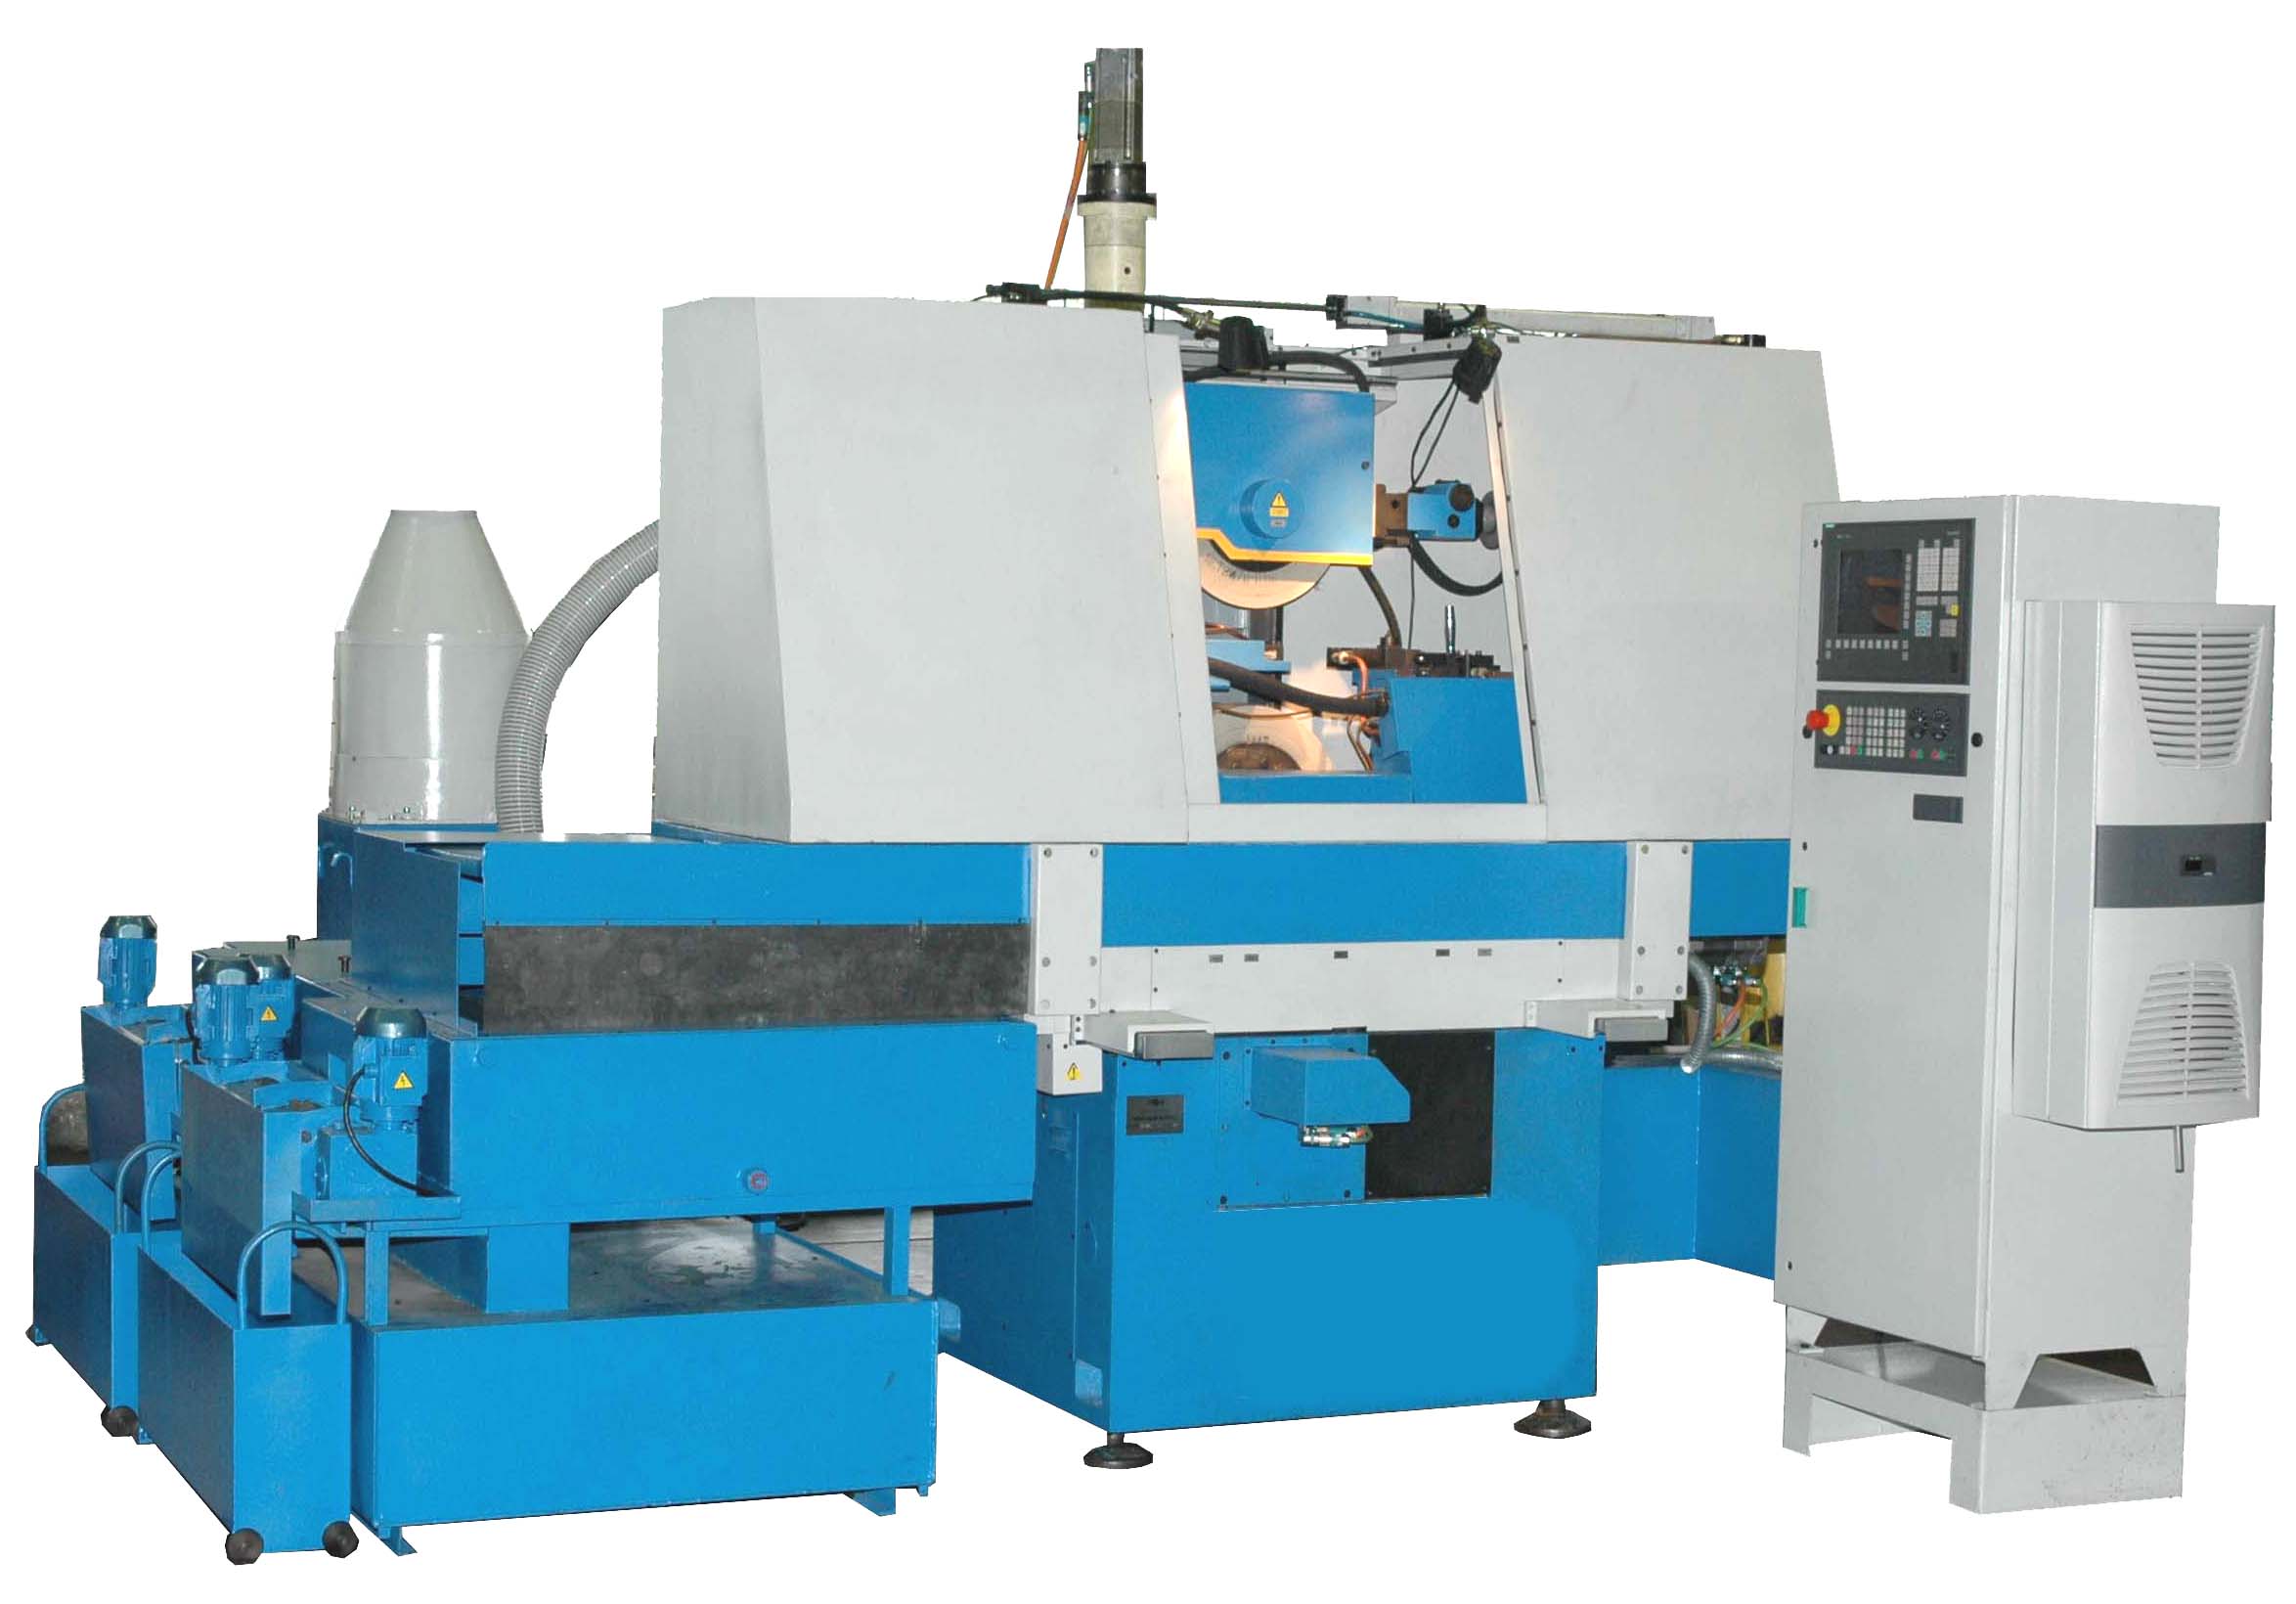 SEMIAUTOMATIC SPECIAL DOUBLE SPINDLE GROOVE GRINDING MACHINE WITH CNC OSH-627F3